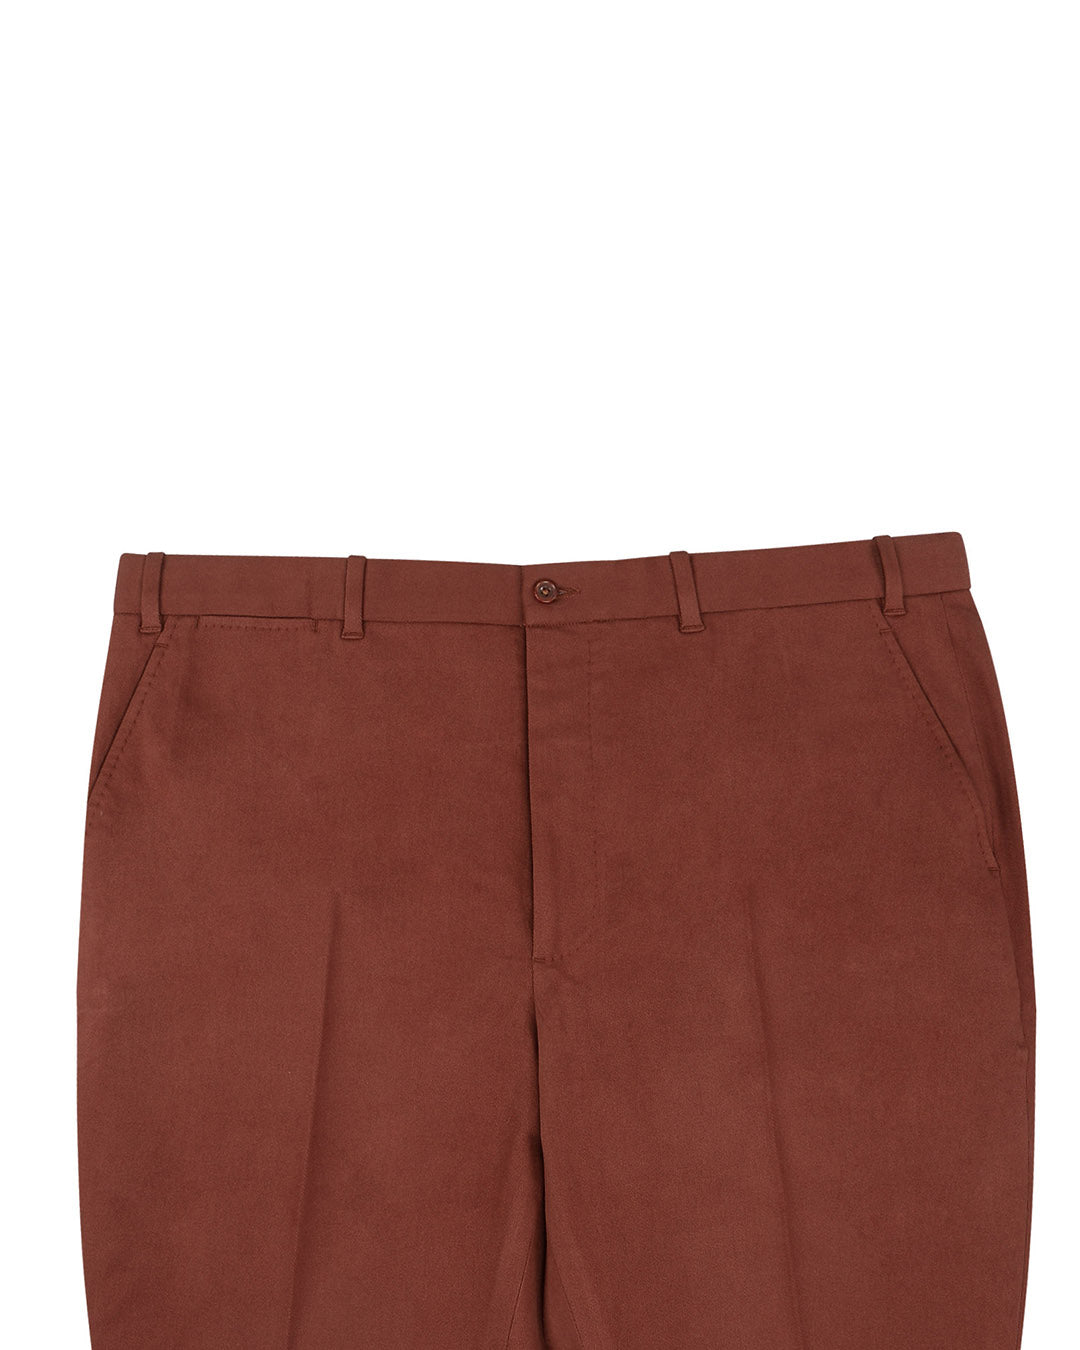 Brown 4-Way Stretchable Soft Chinos